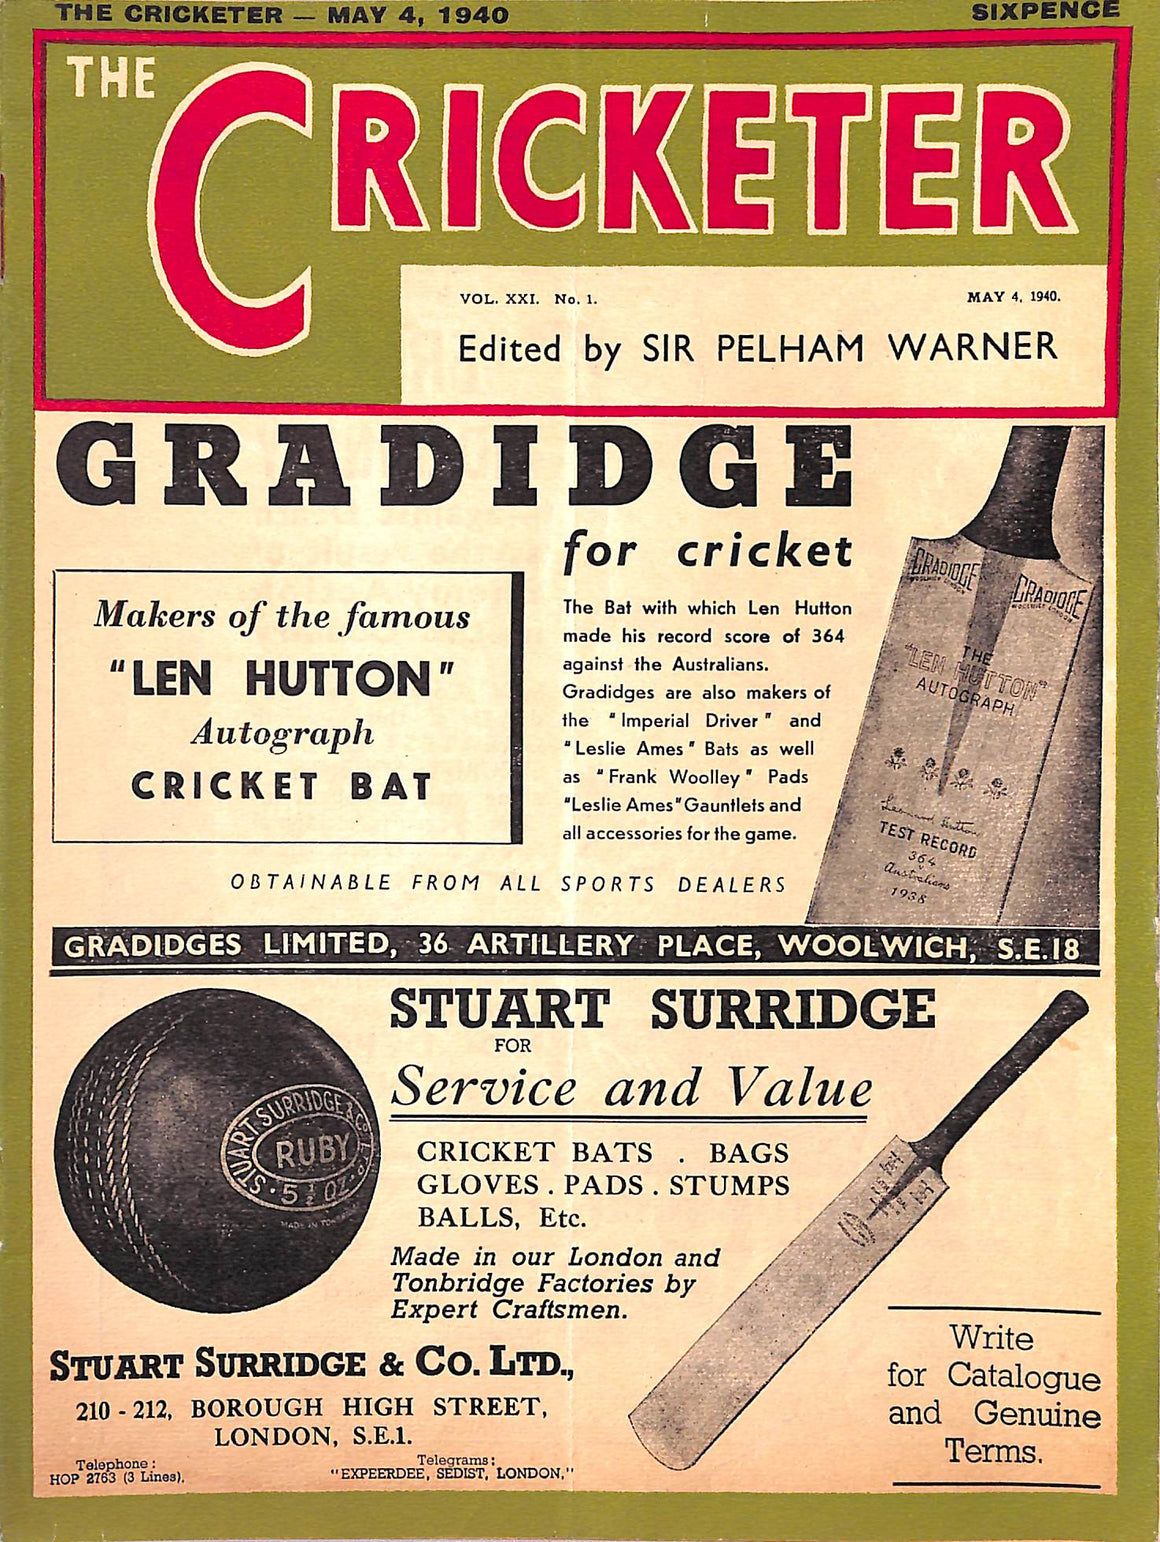 The Cricketer - May 4, 1940